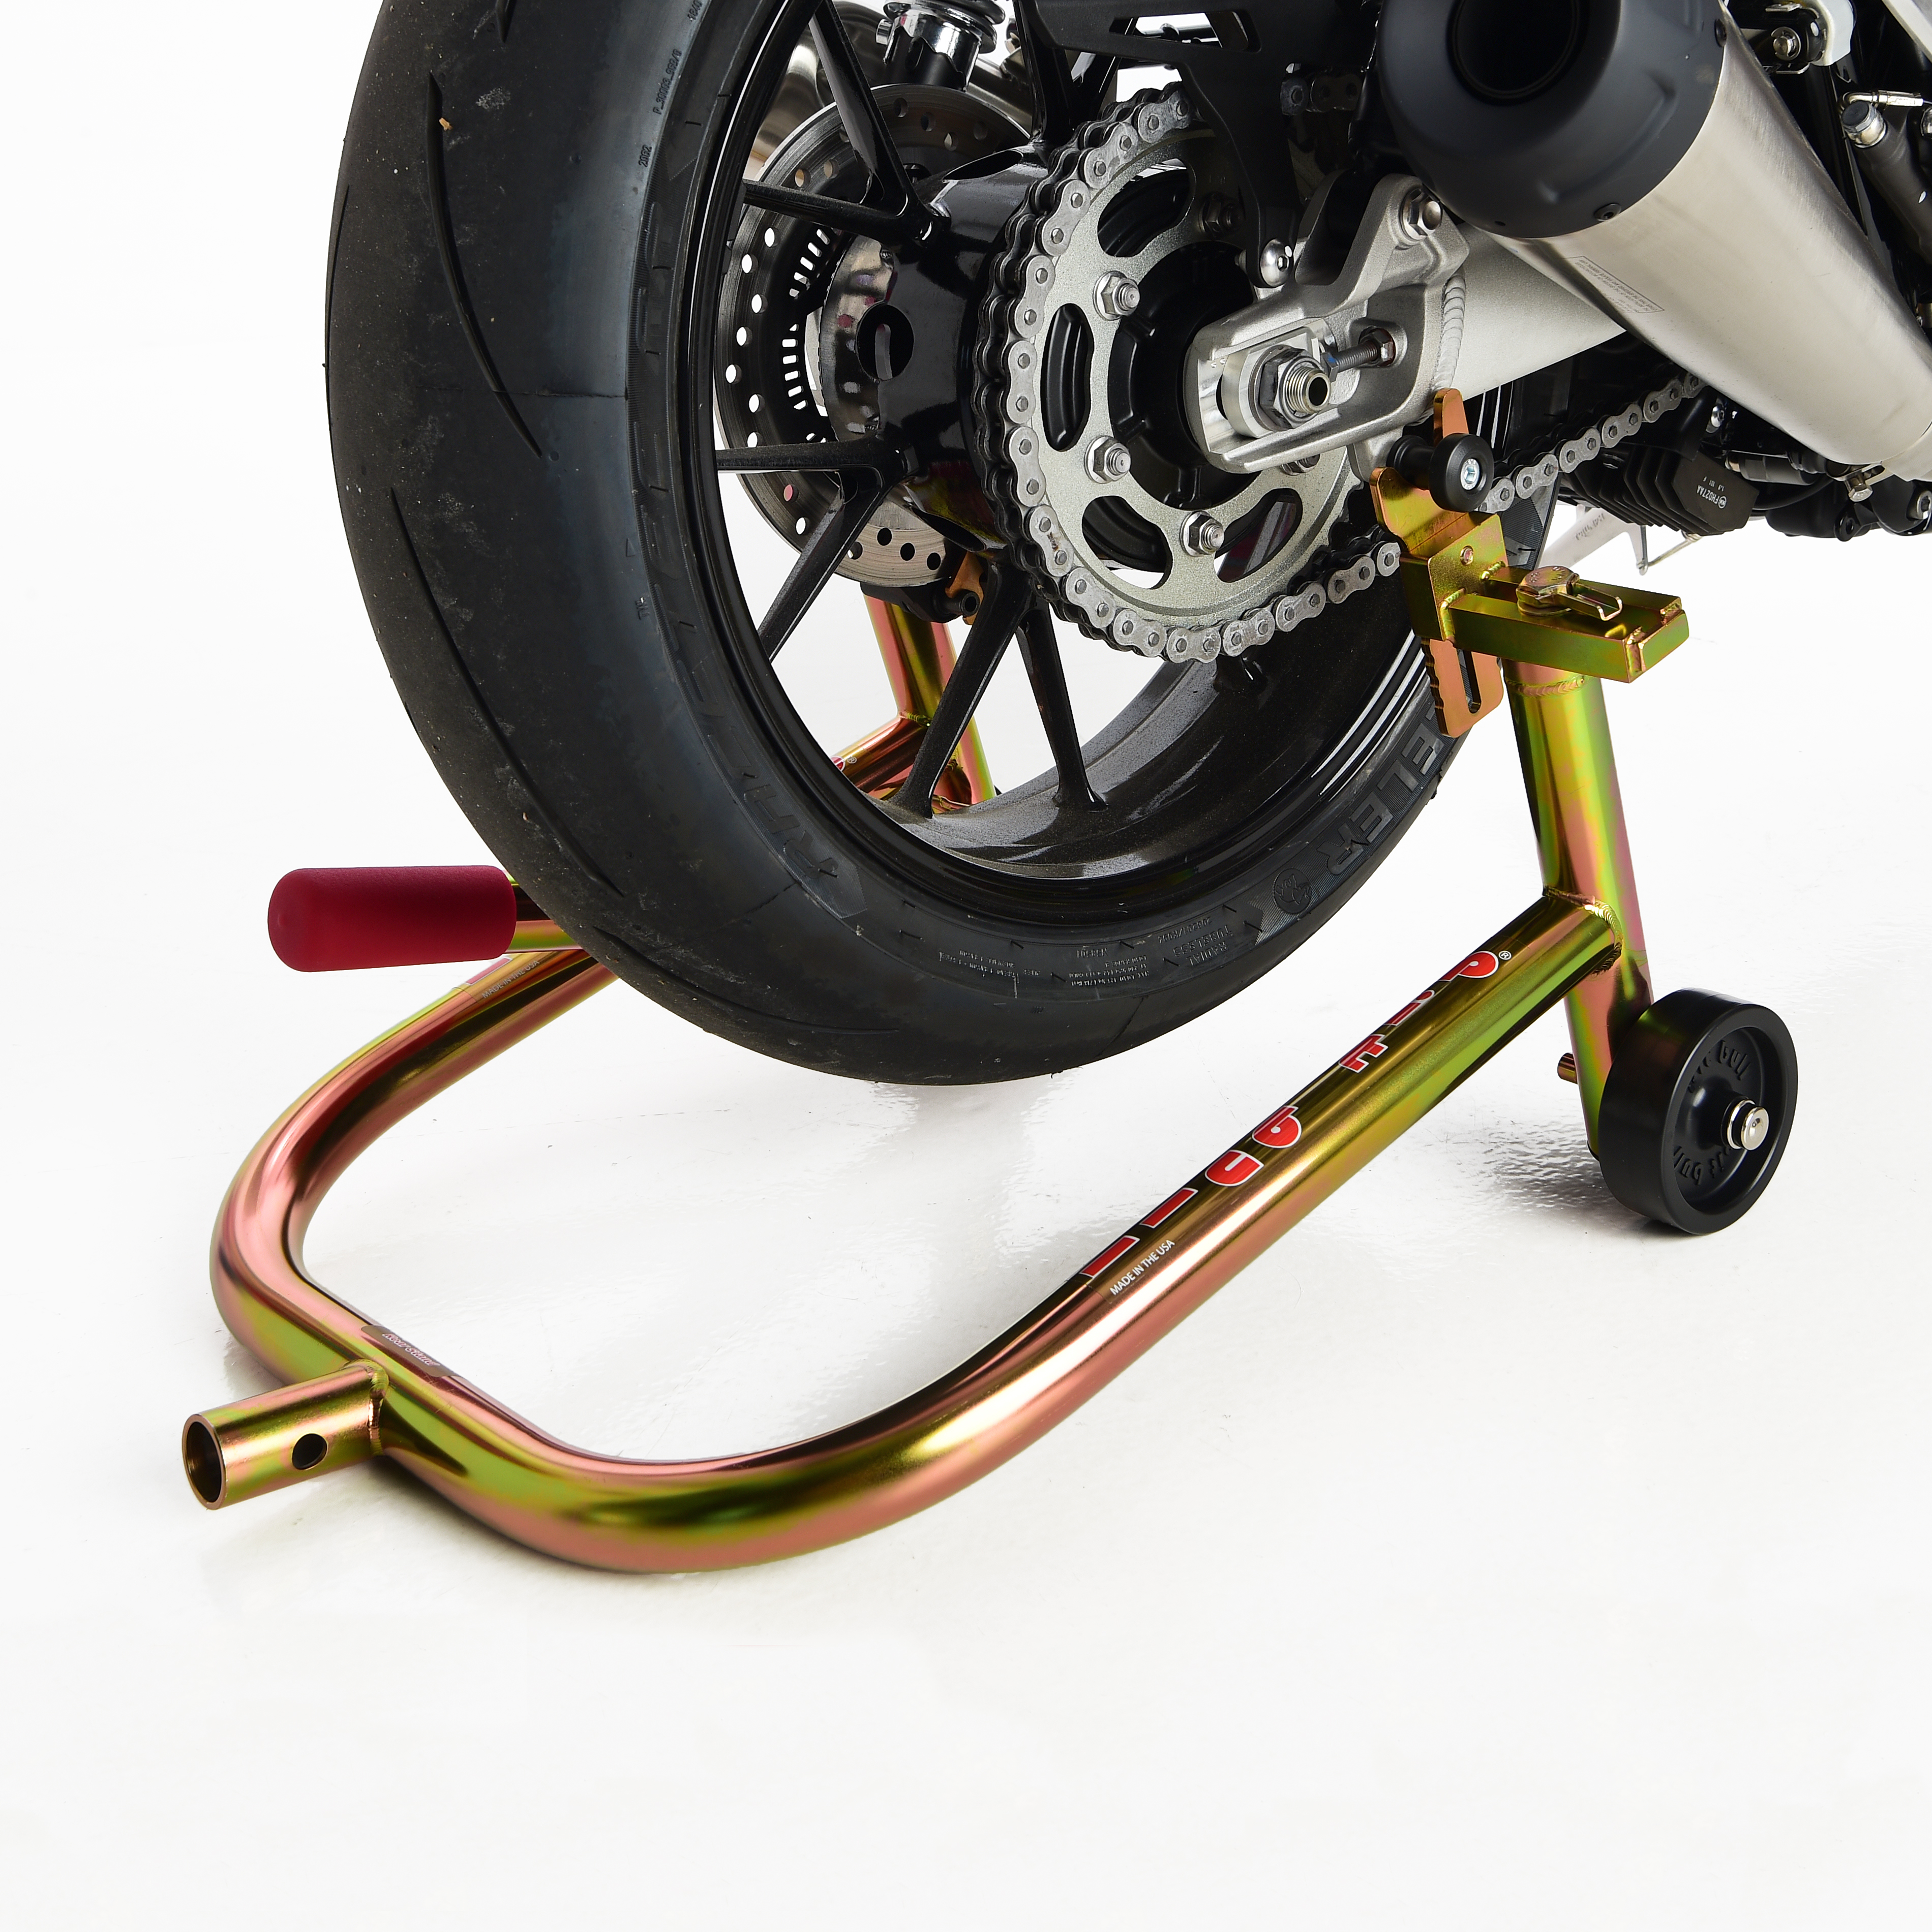 Adjustable rear motorcycle stands